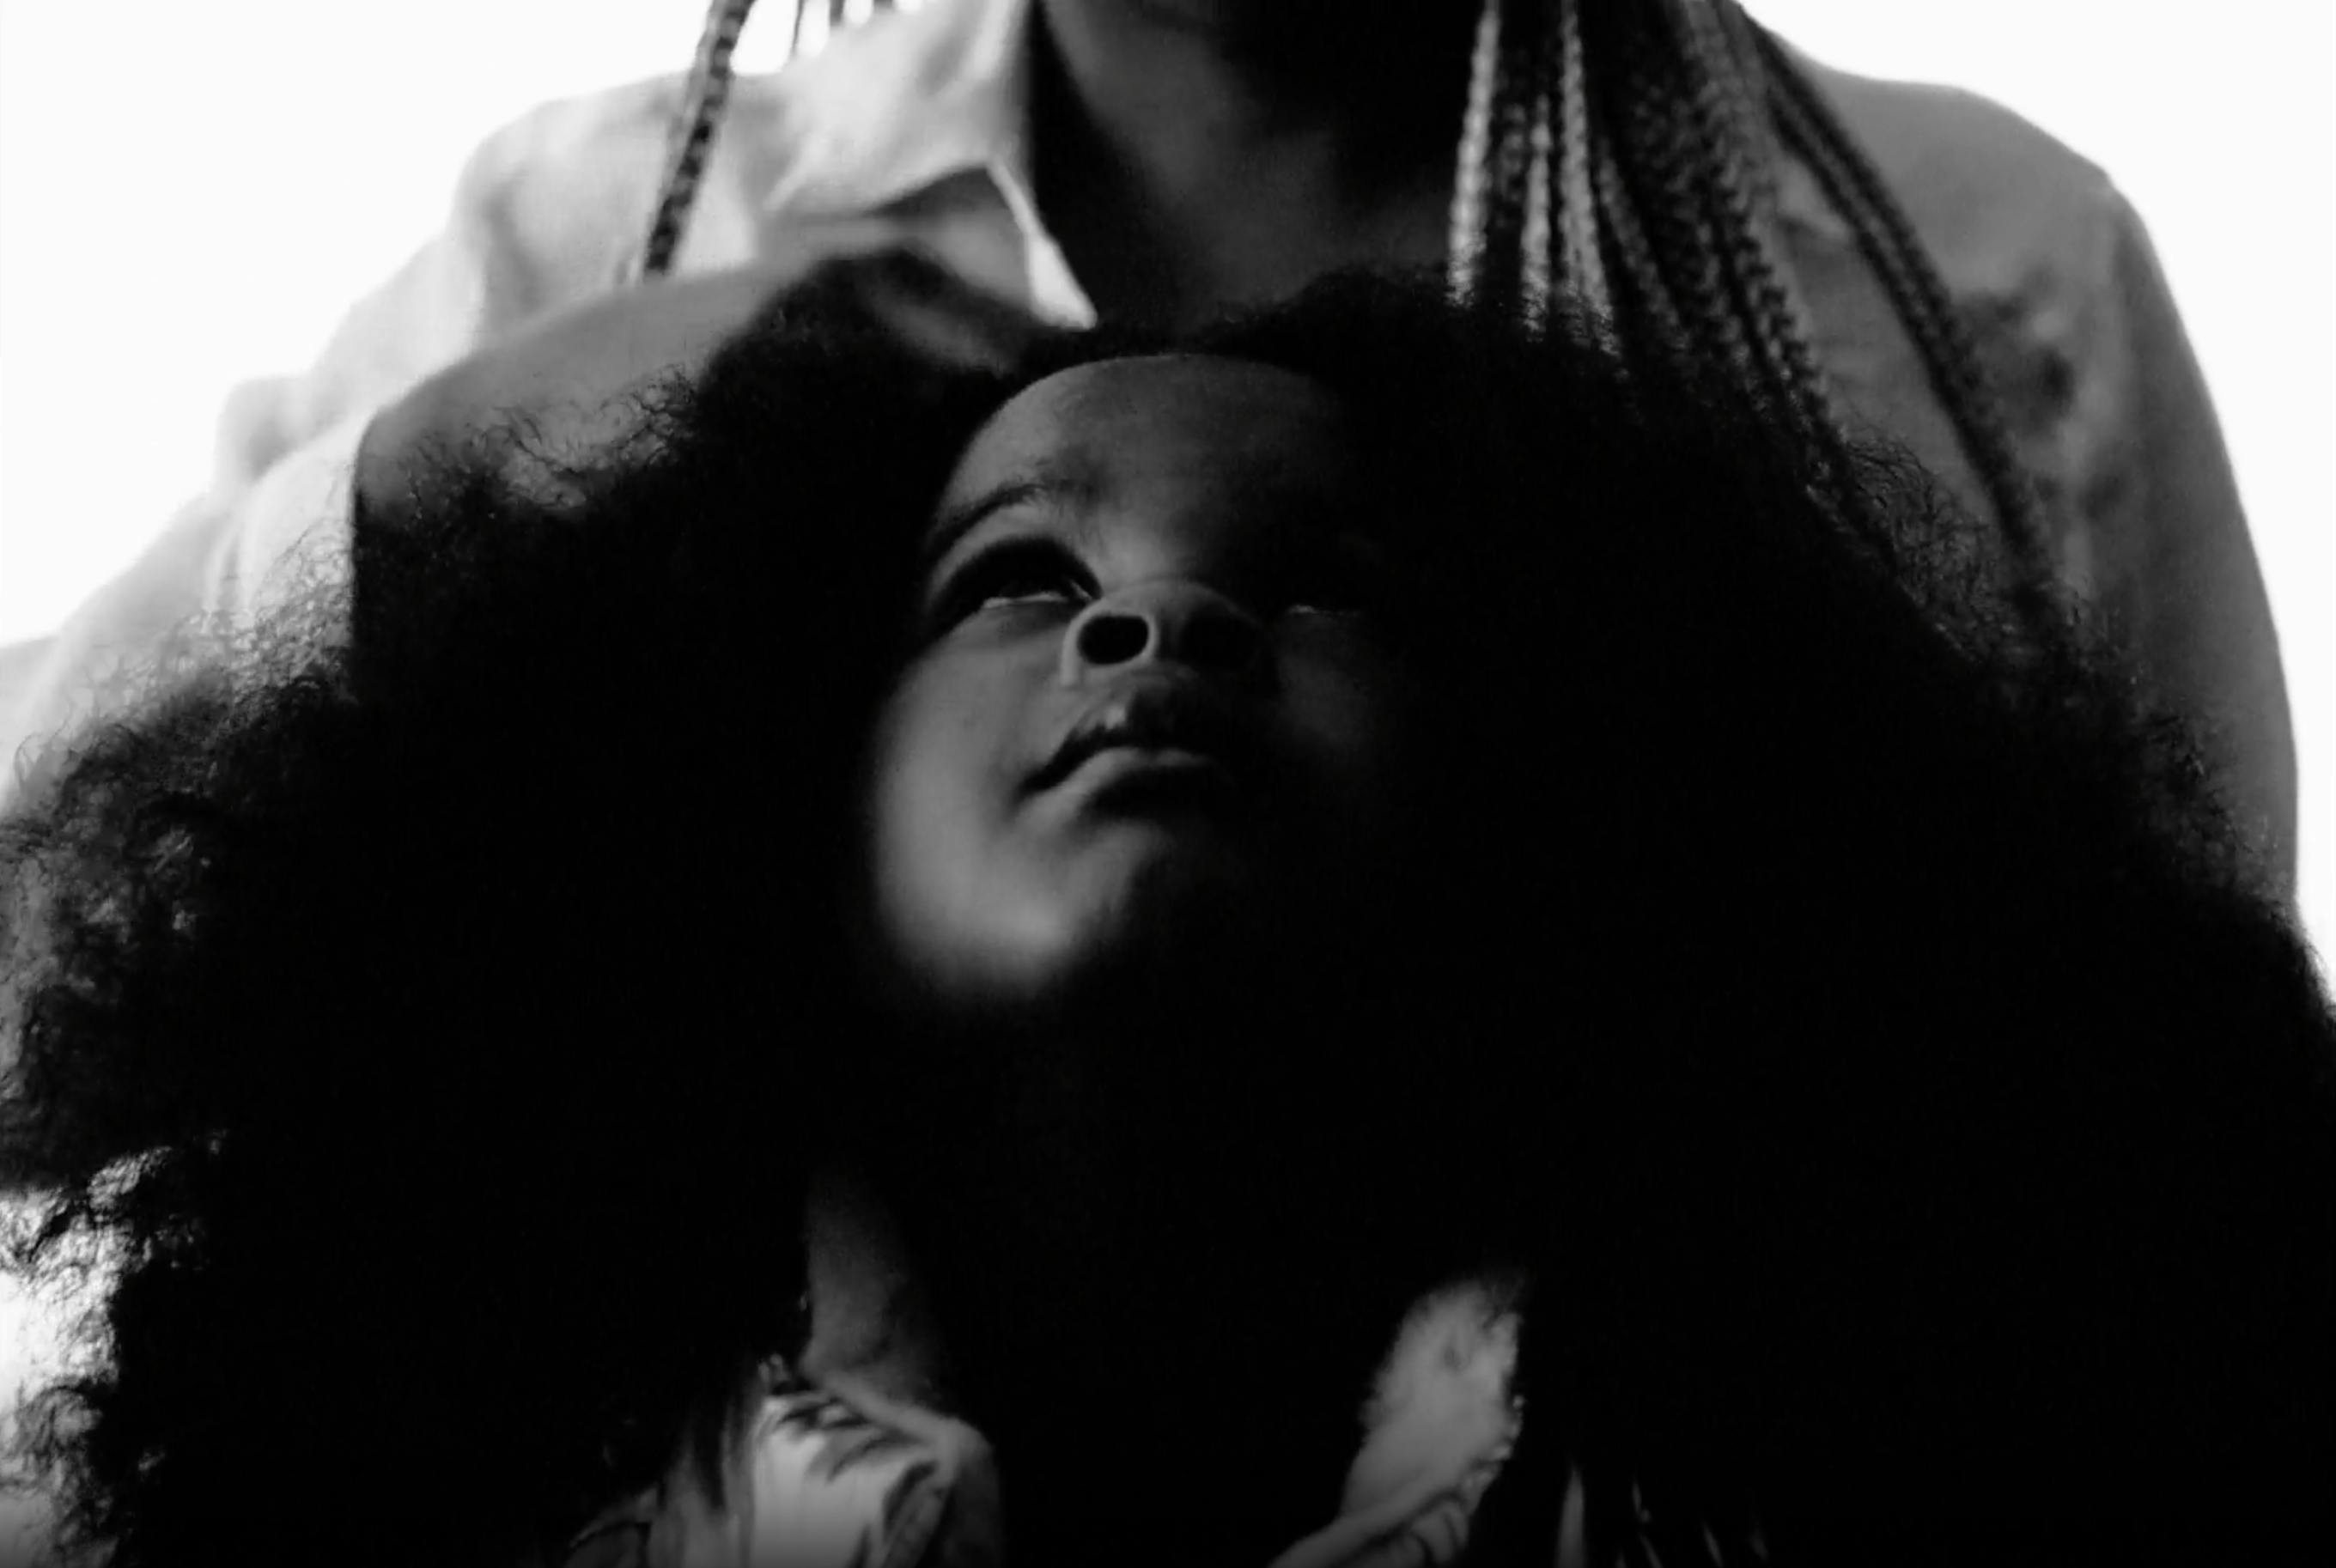 A black and white image of a child looking up while her hair is braided